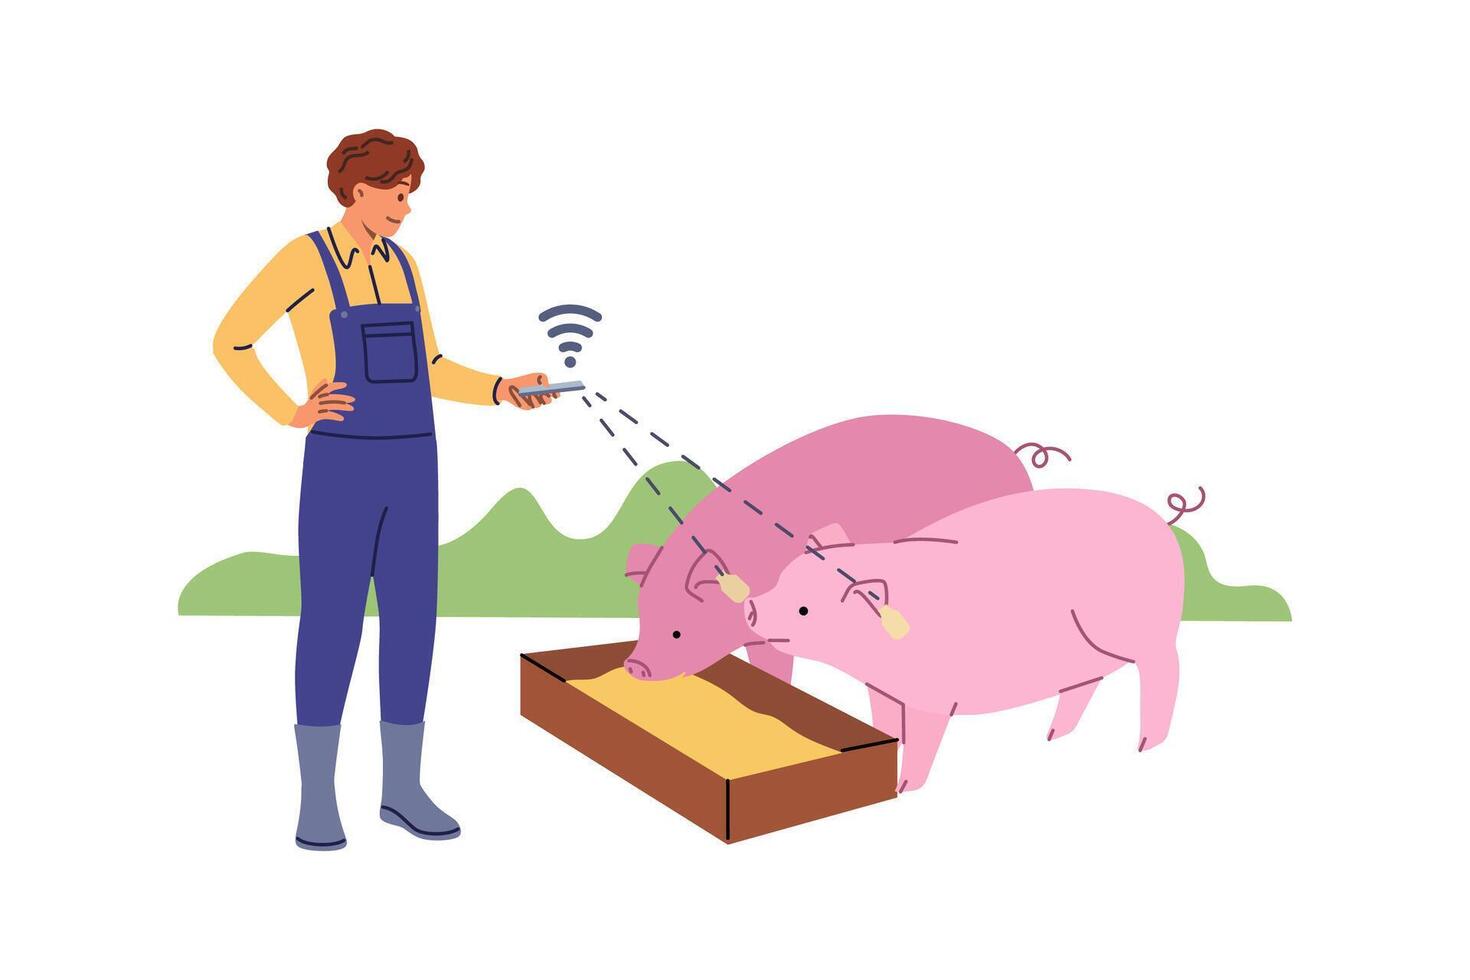 Farmer controls smart livestock farm via phone, standing near pigs with WiFi chips in ears vector